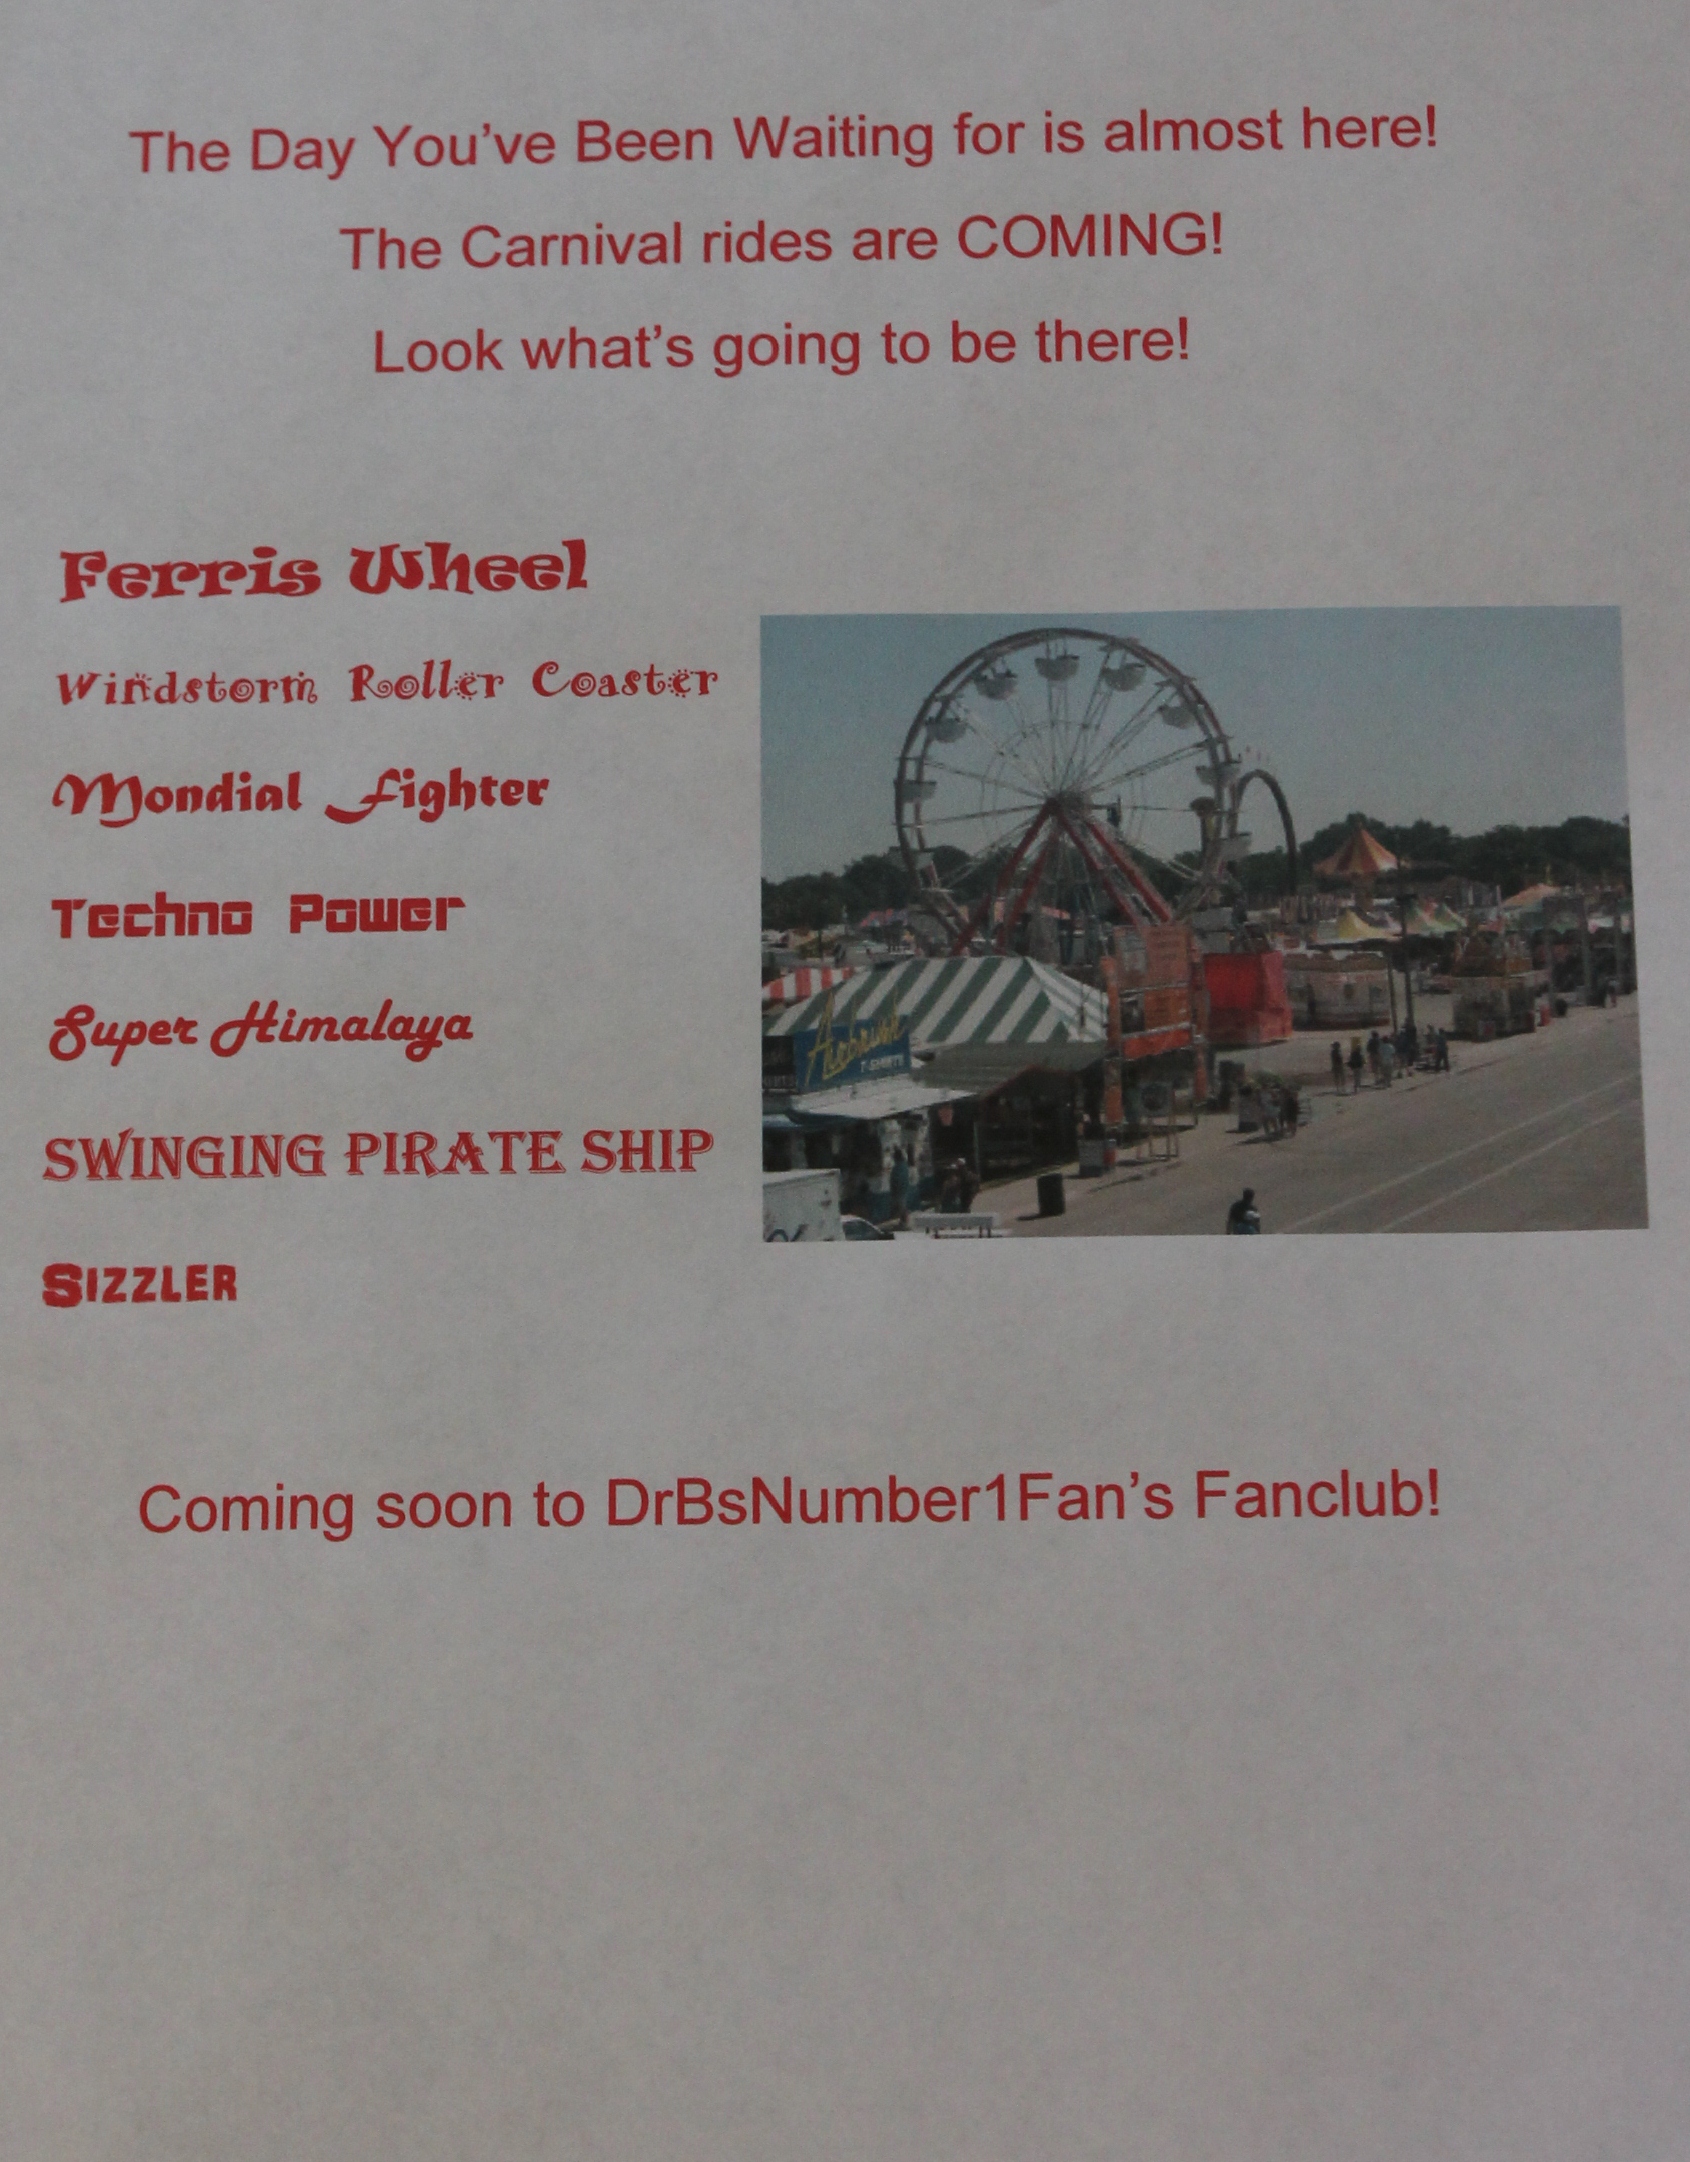 Come to my Carnival!